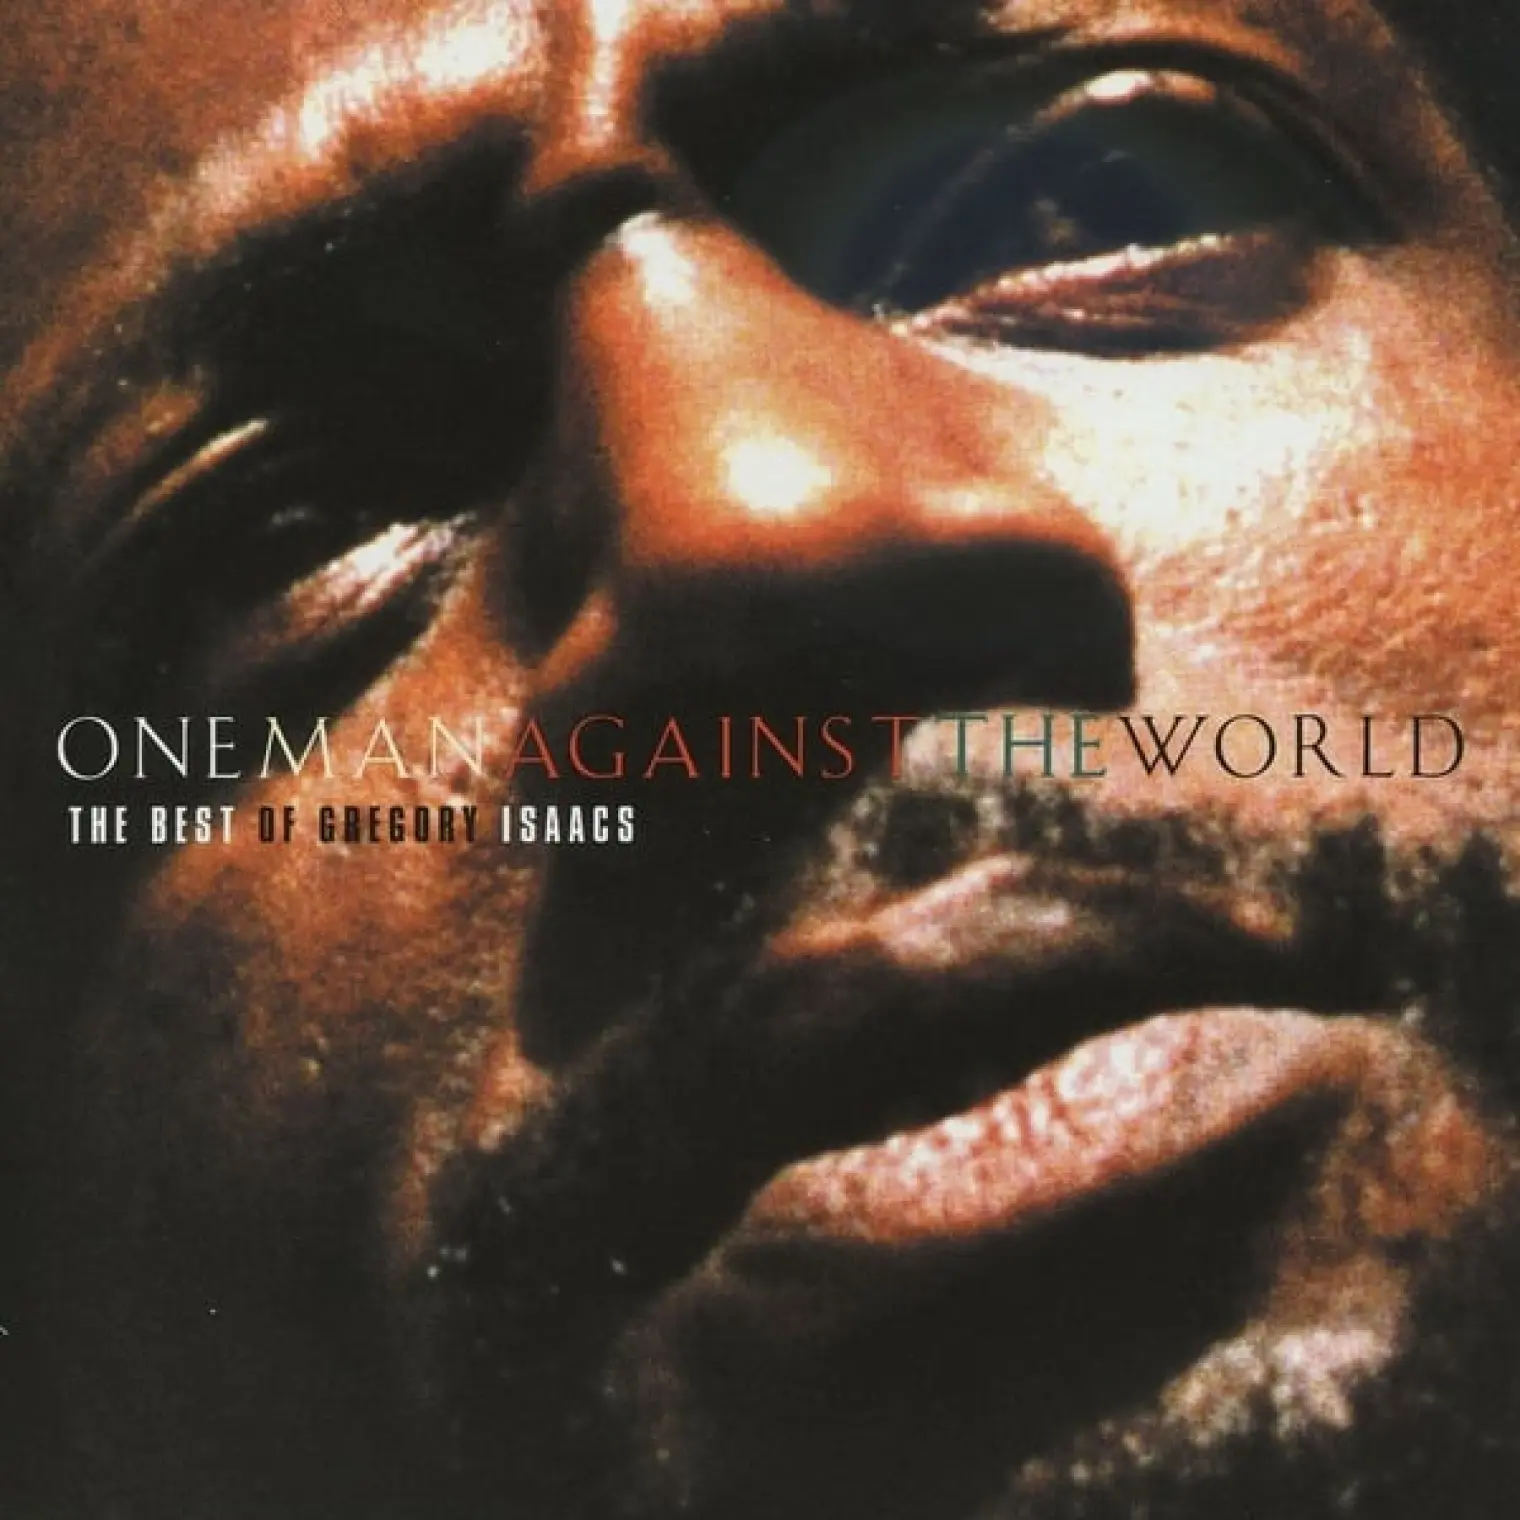 One Man Against The World -  Gregory Isaacs 